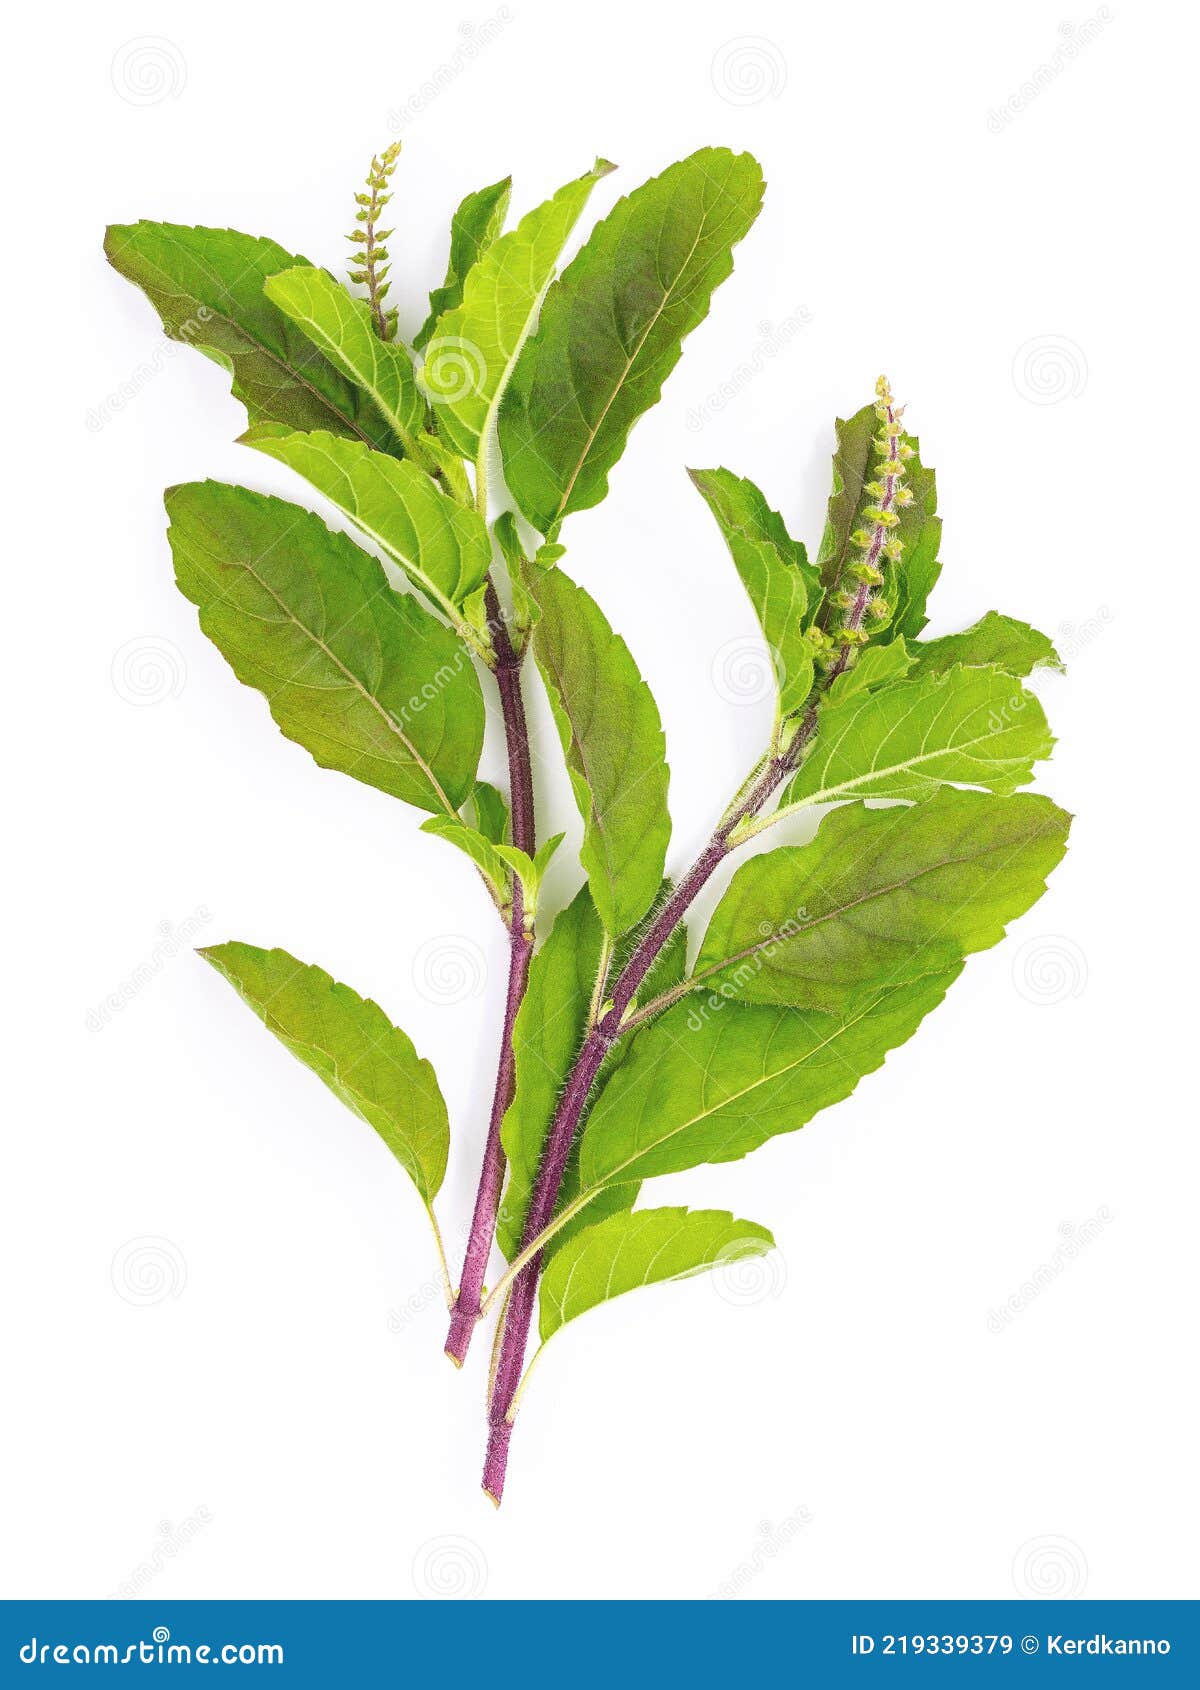 blanch of fresh holy basil leaves isolate on white background